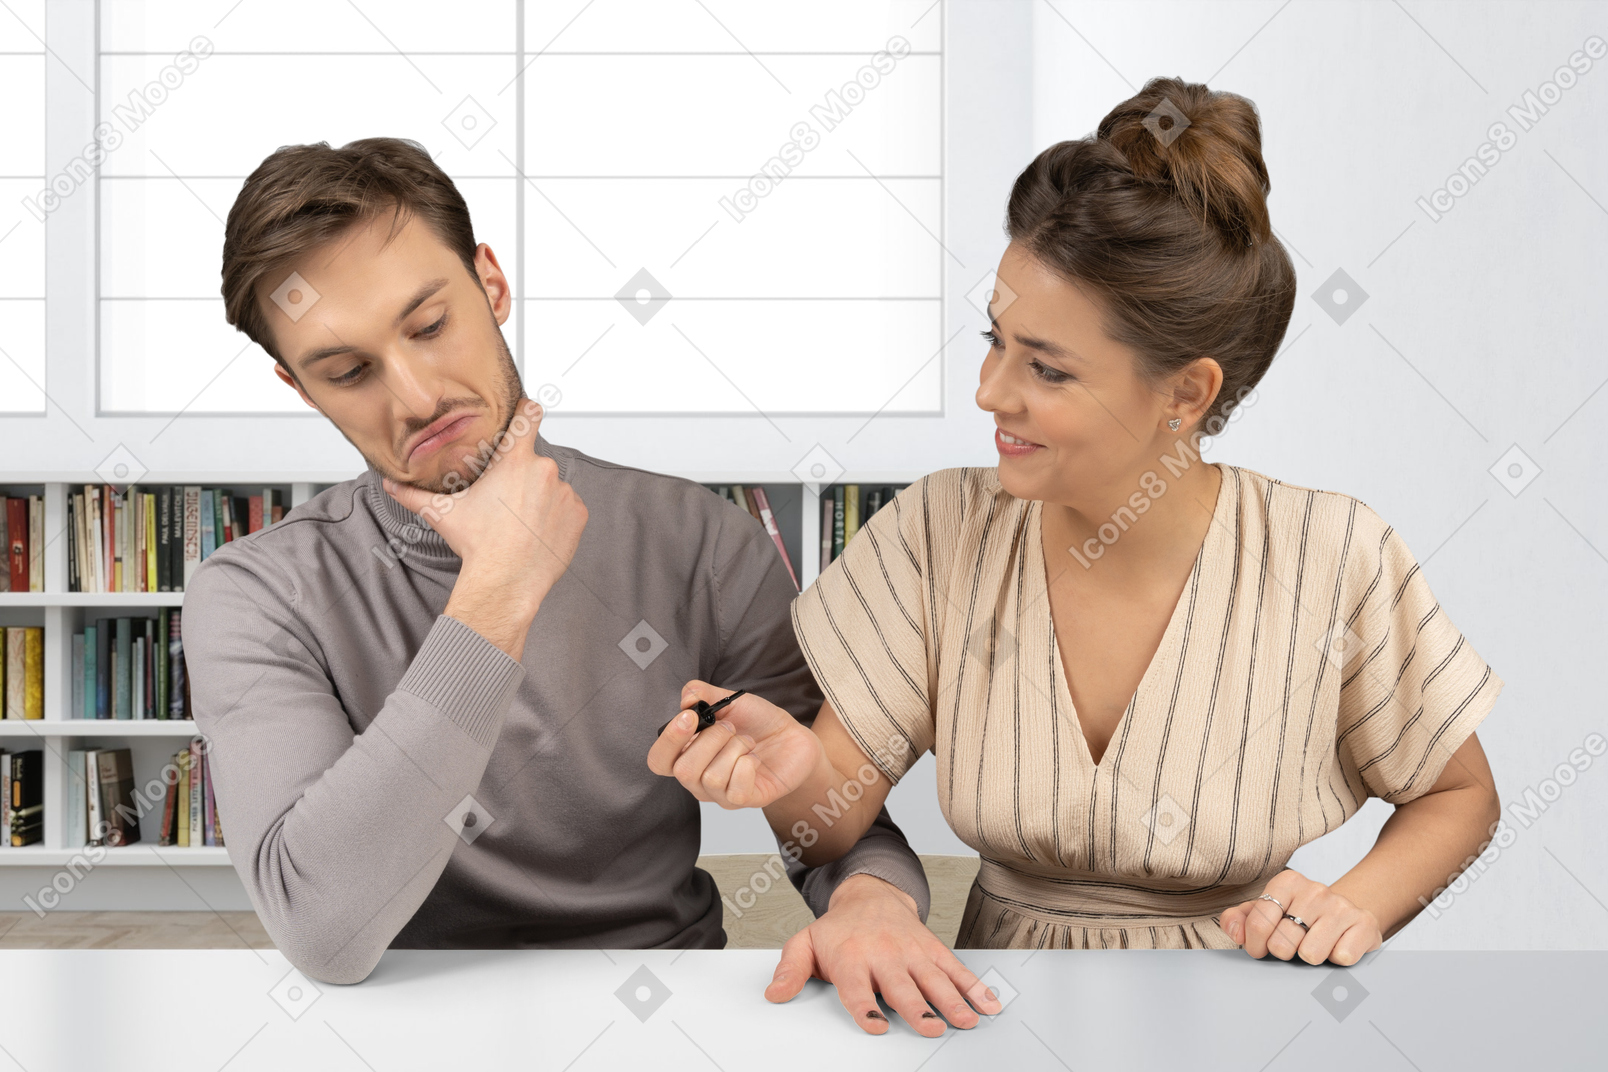 Woman painting nails on a man's hand in a room